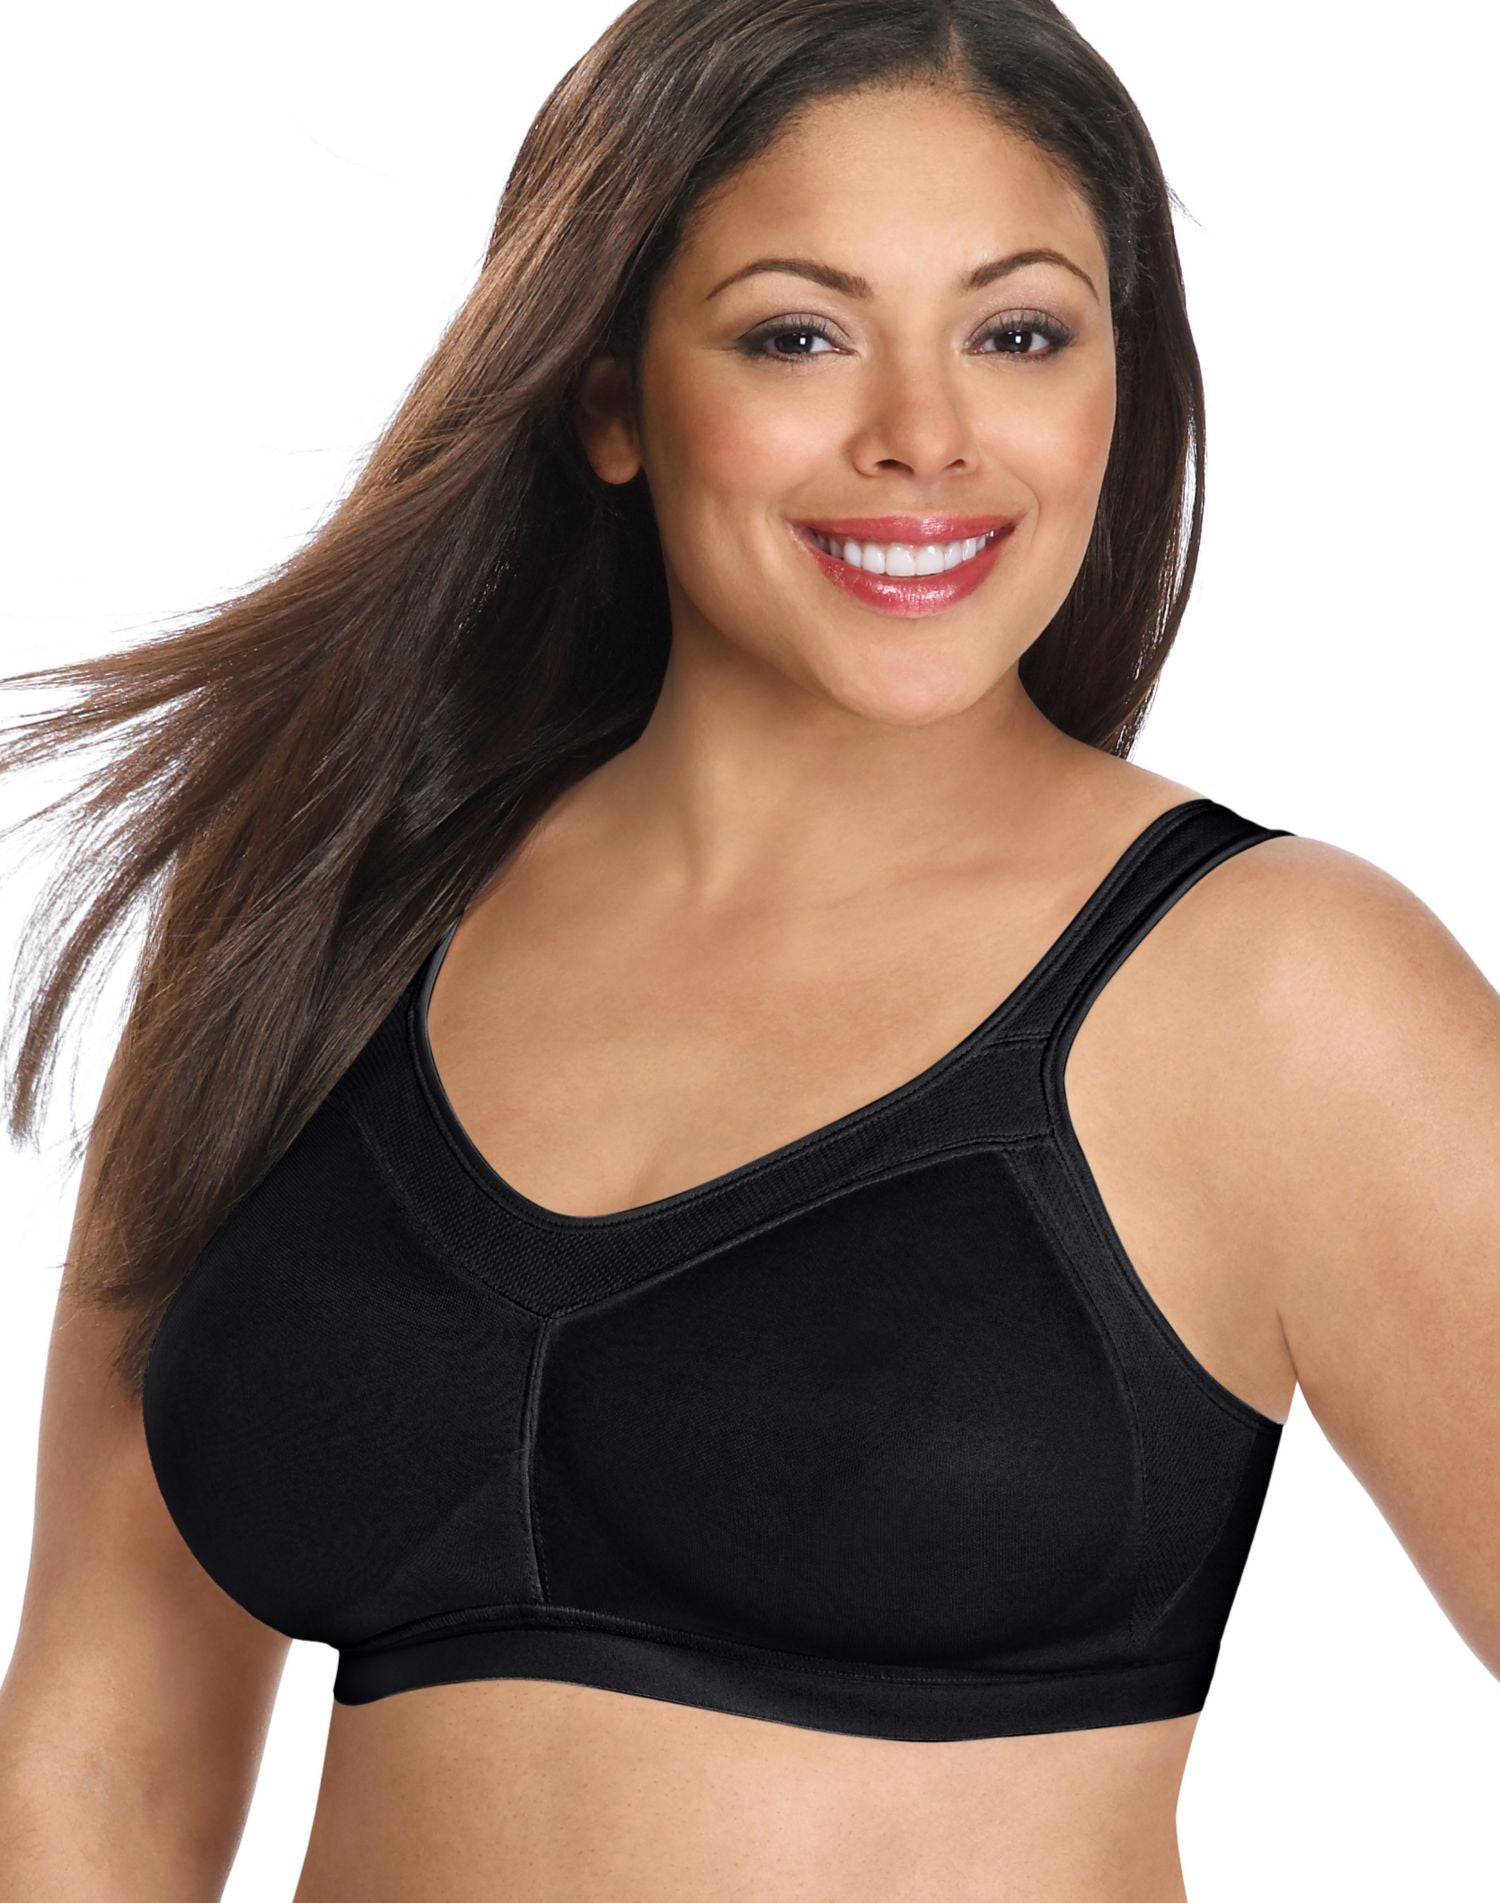 Playtex 18 Hour Active Lifestyle Bra 4159 - Nude Size 42dd for sale online